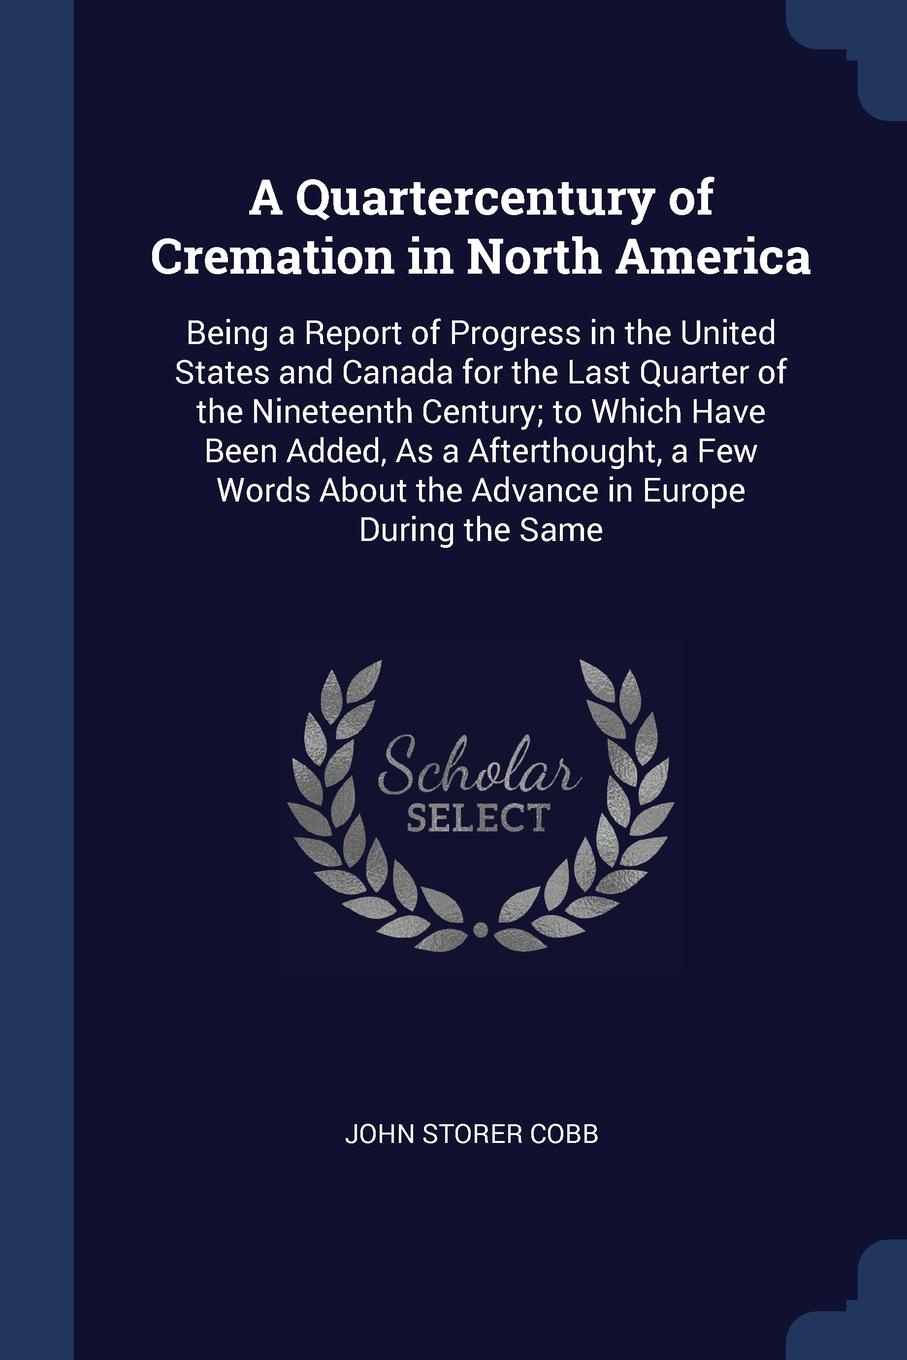 A Quartercentury of Cremation in North America. Being a Report of Progress in the United States and Canada for the Last Quarter of the Nineteenth Century; to Which Have Been Added, As a Afterthought, a Few Words About the Advance in Europe During ...